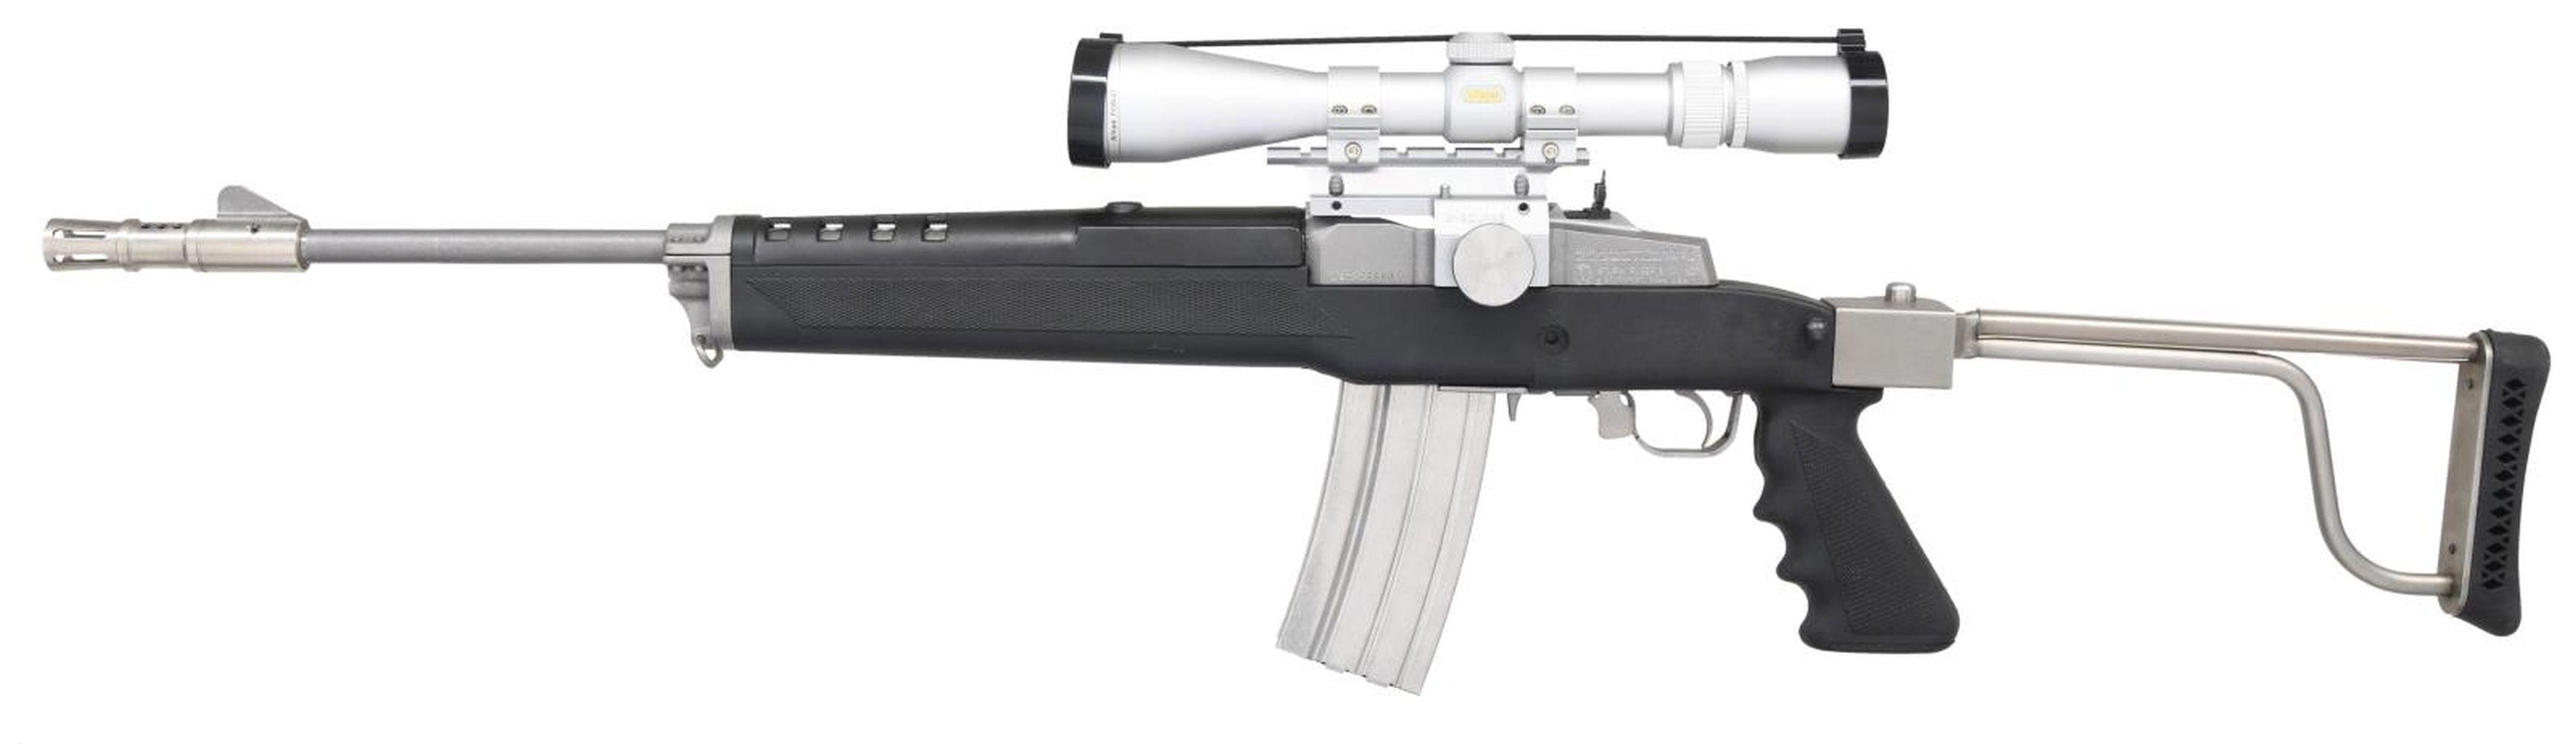 RUGER STAINLESS MINI-14 SEMI-AUTO RANCH RIFLE.